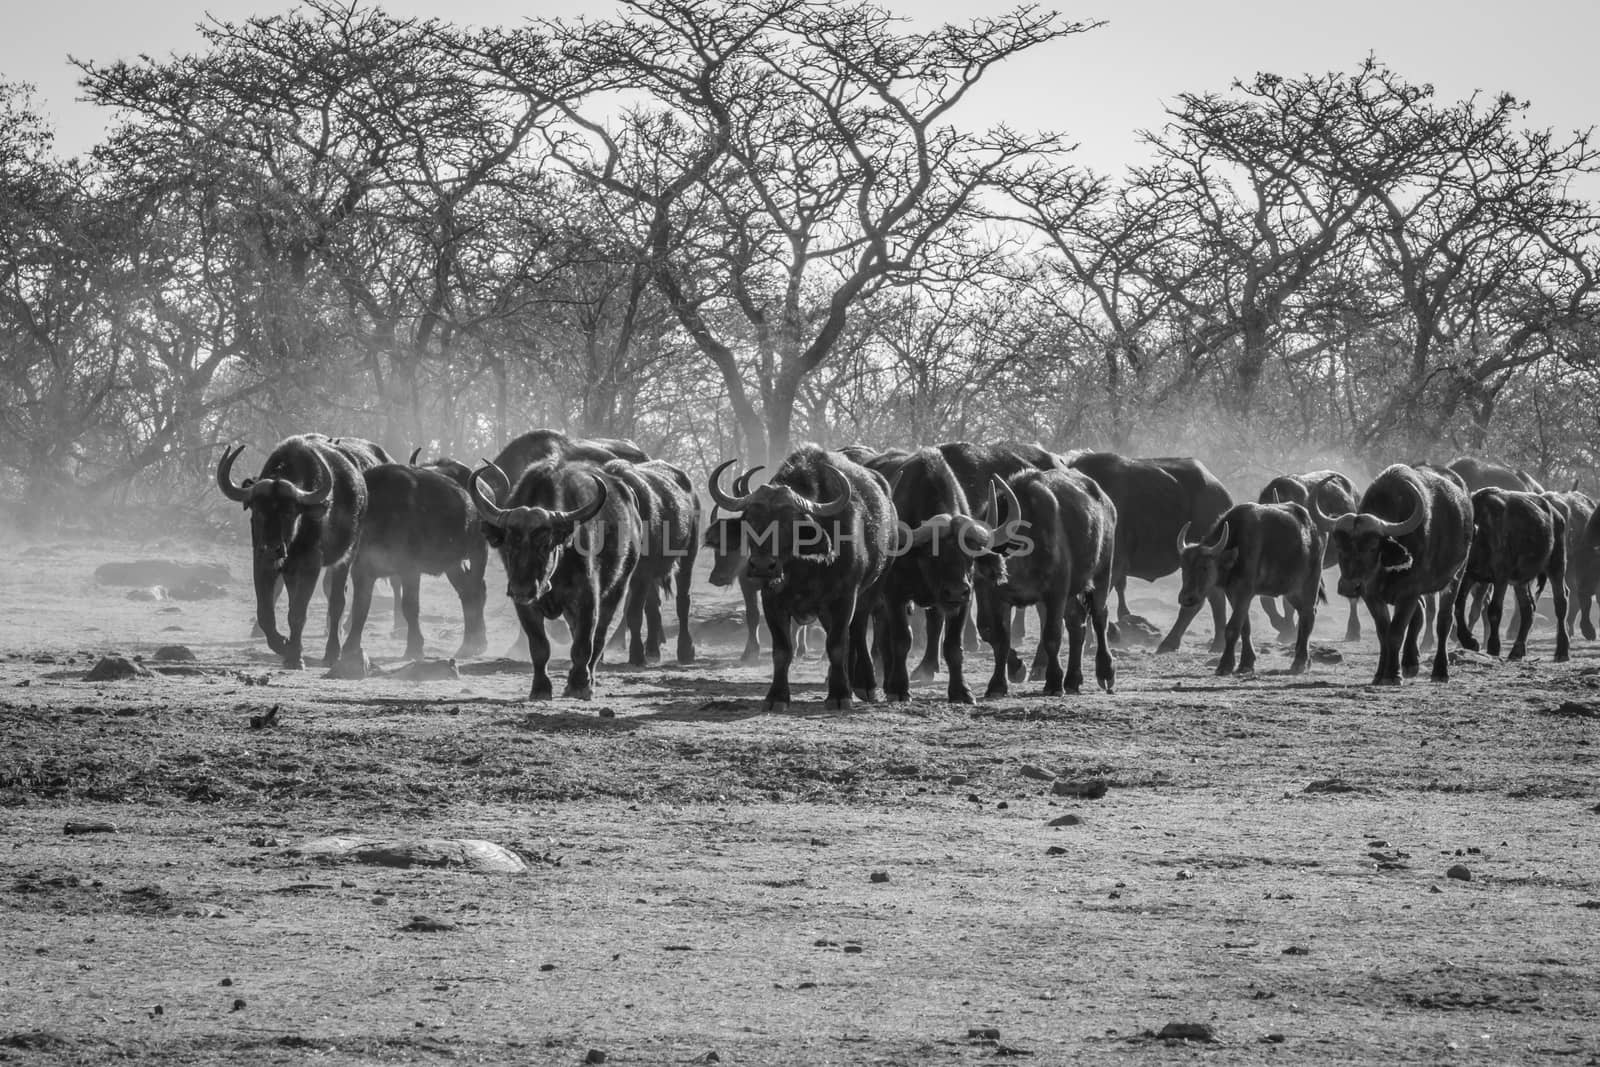 Big herd of African buffalos on an open plain in black and white in the Welgevonden game reserve, South Africa.